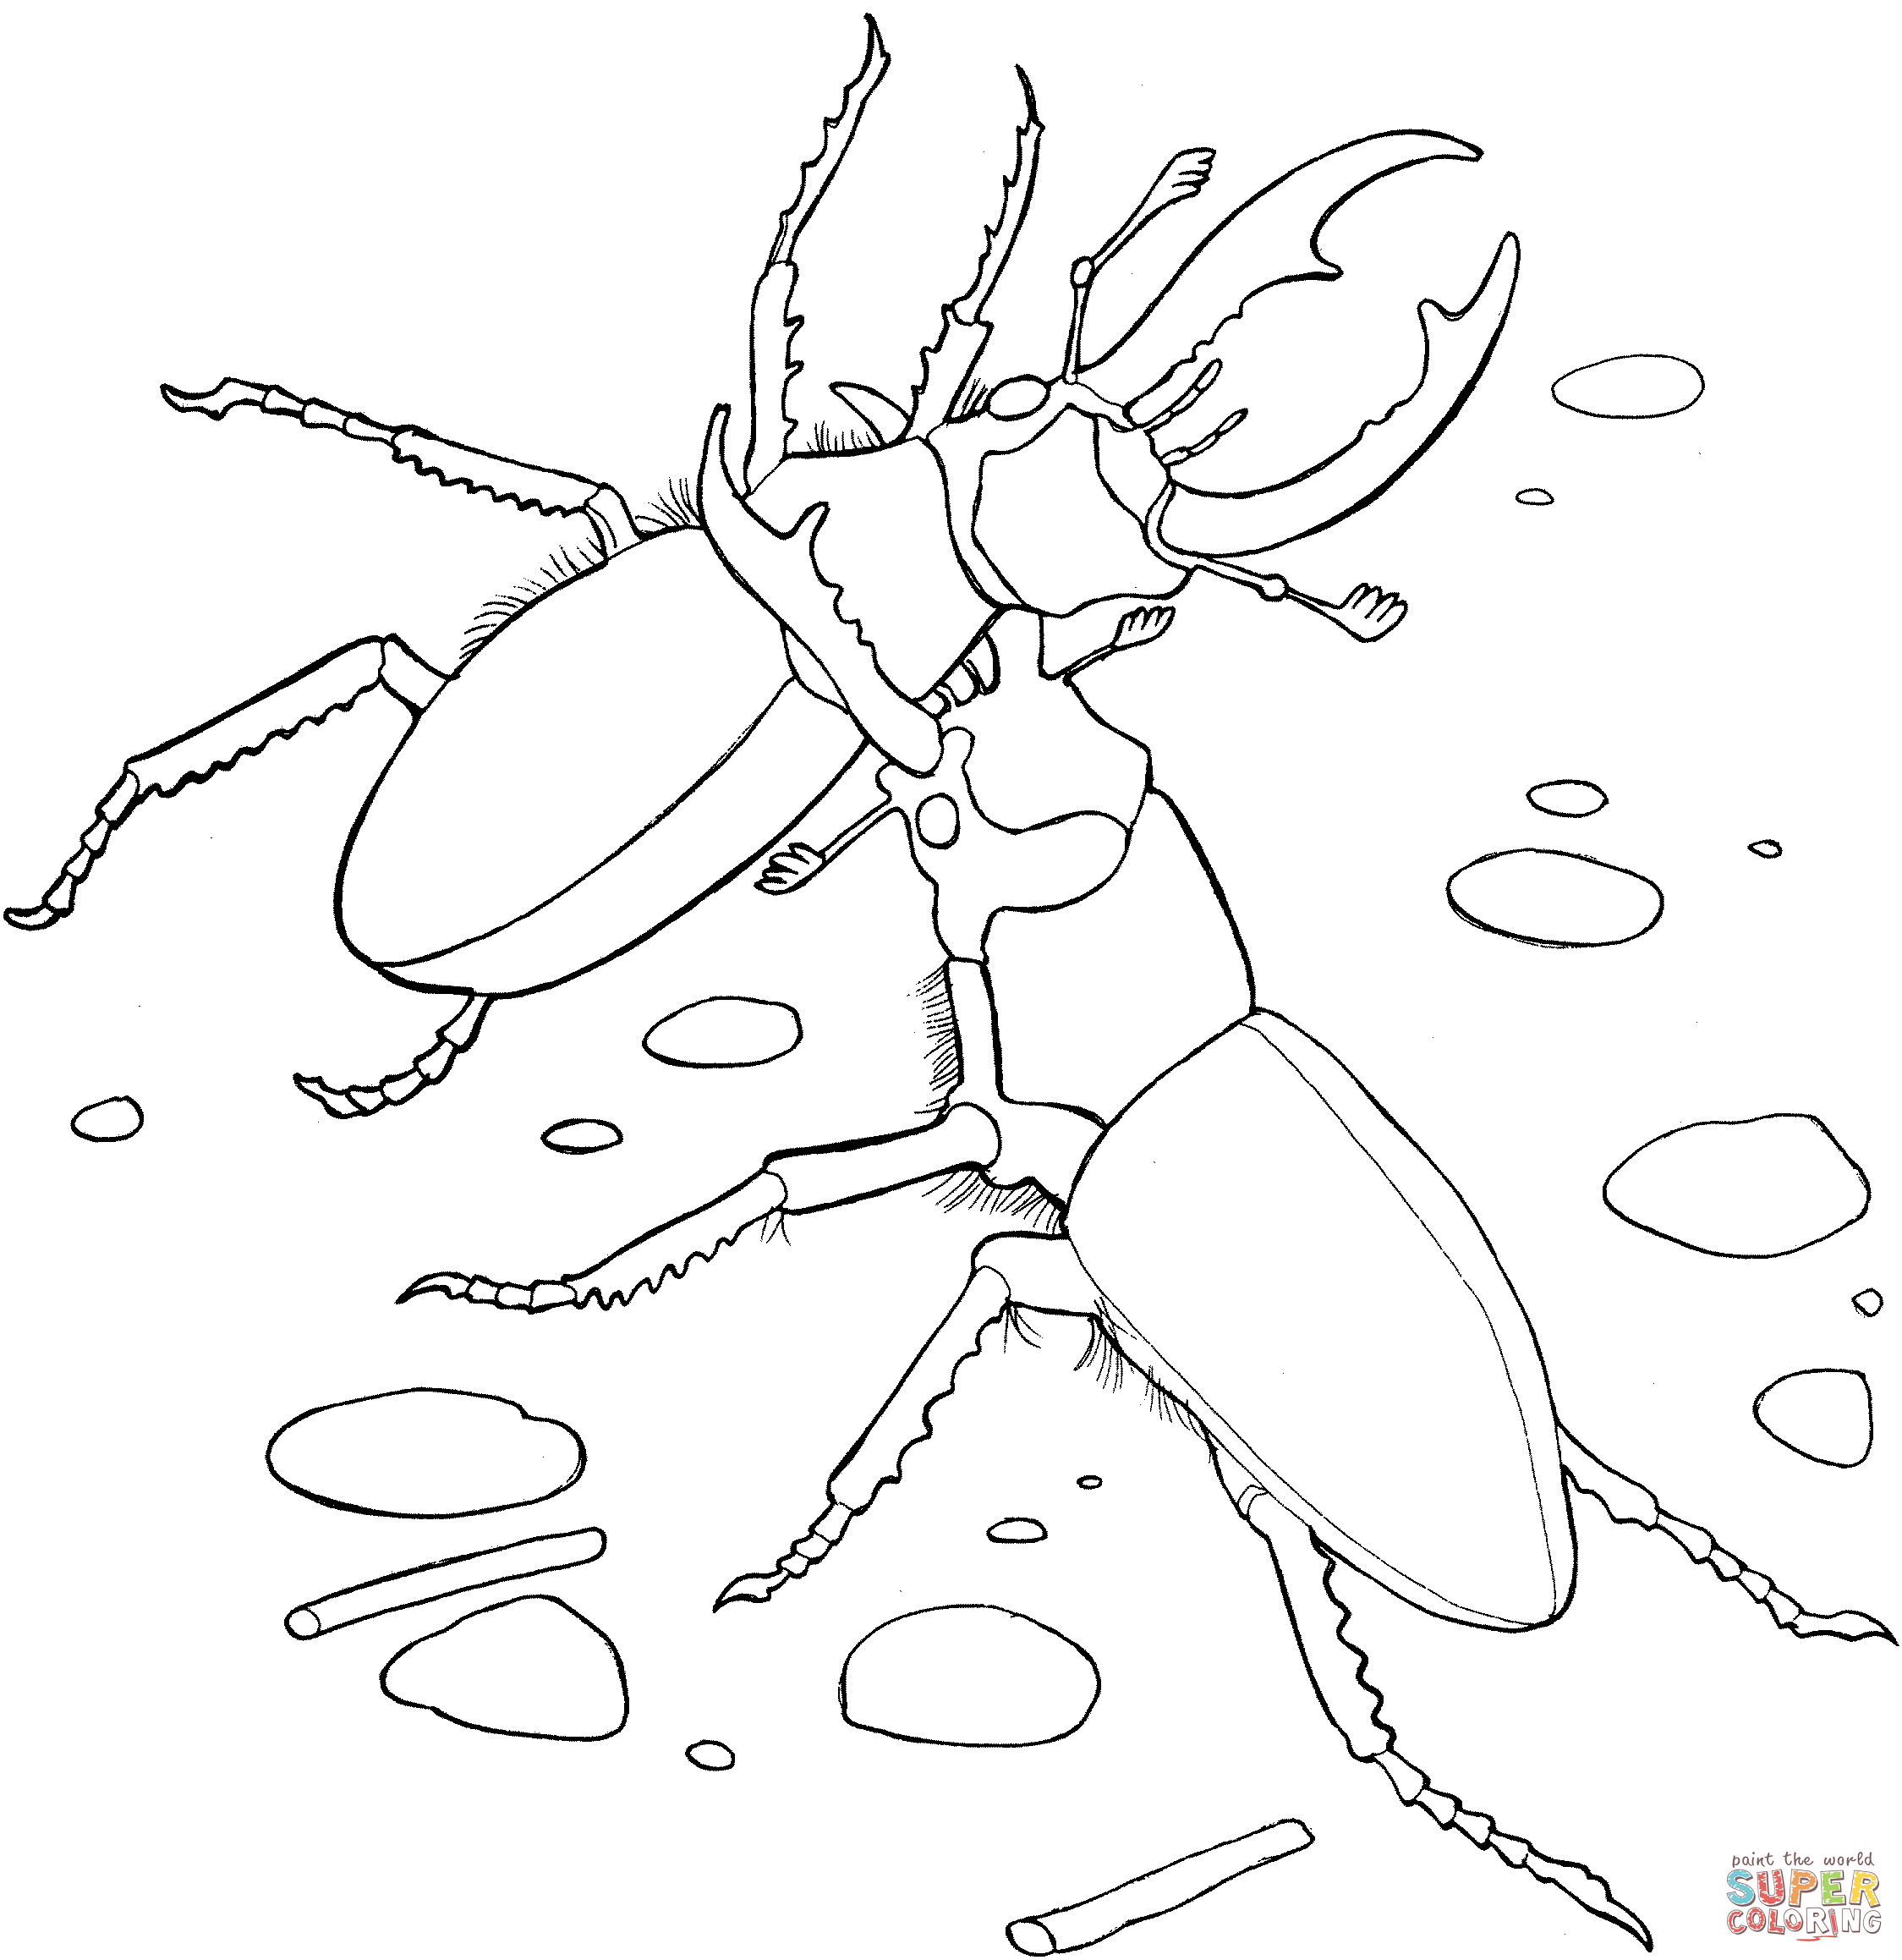 Elephant Stag Beetles Coloring page | Free Printable Coloring Pages